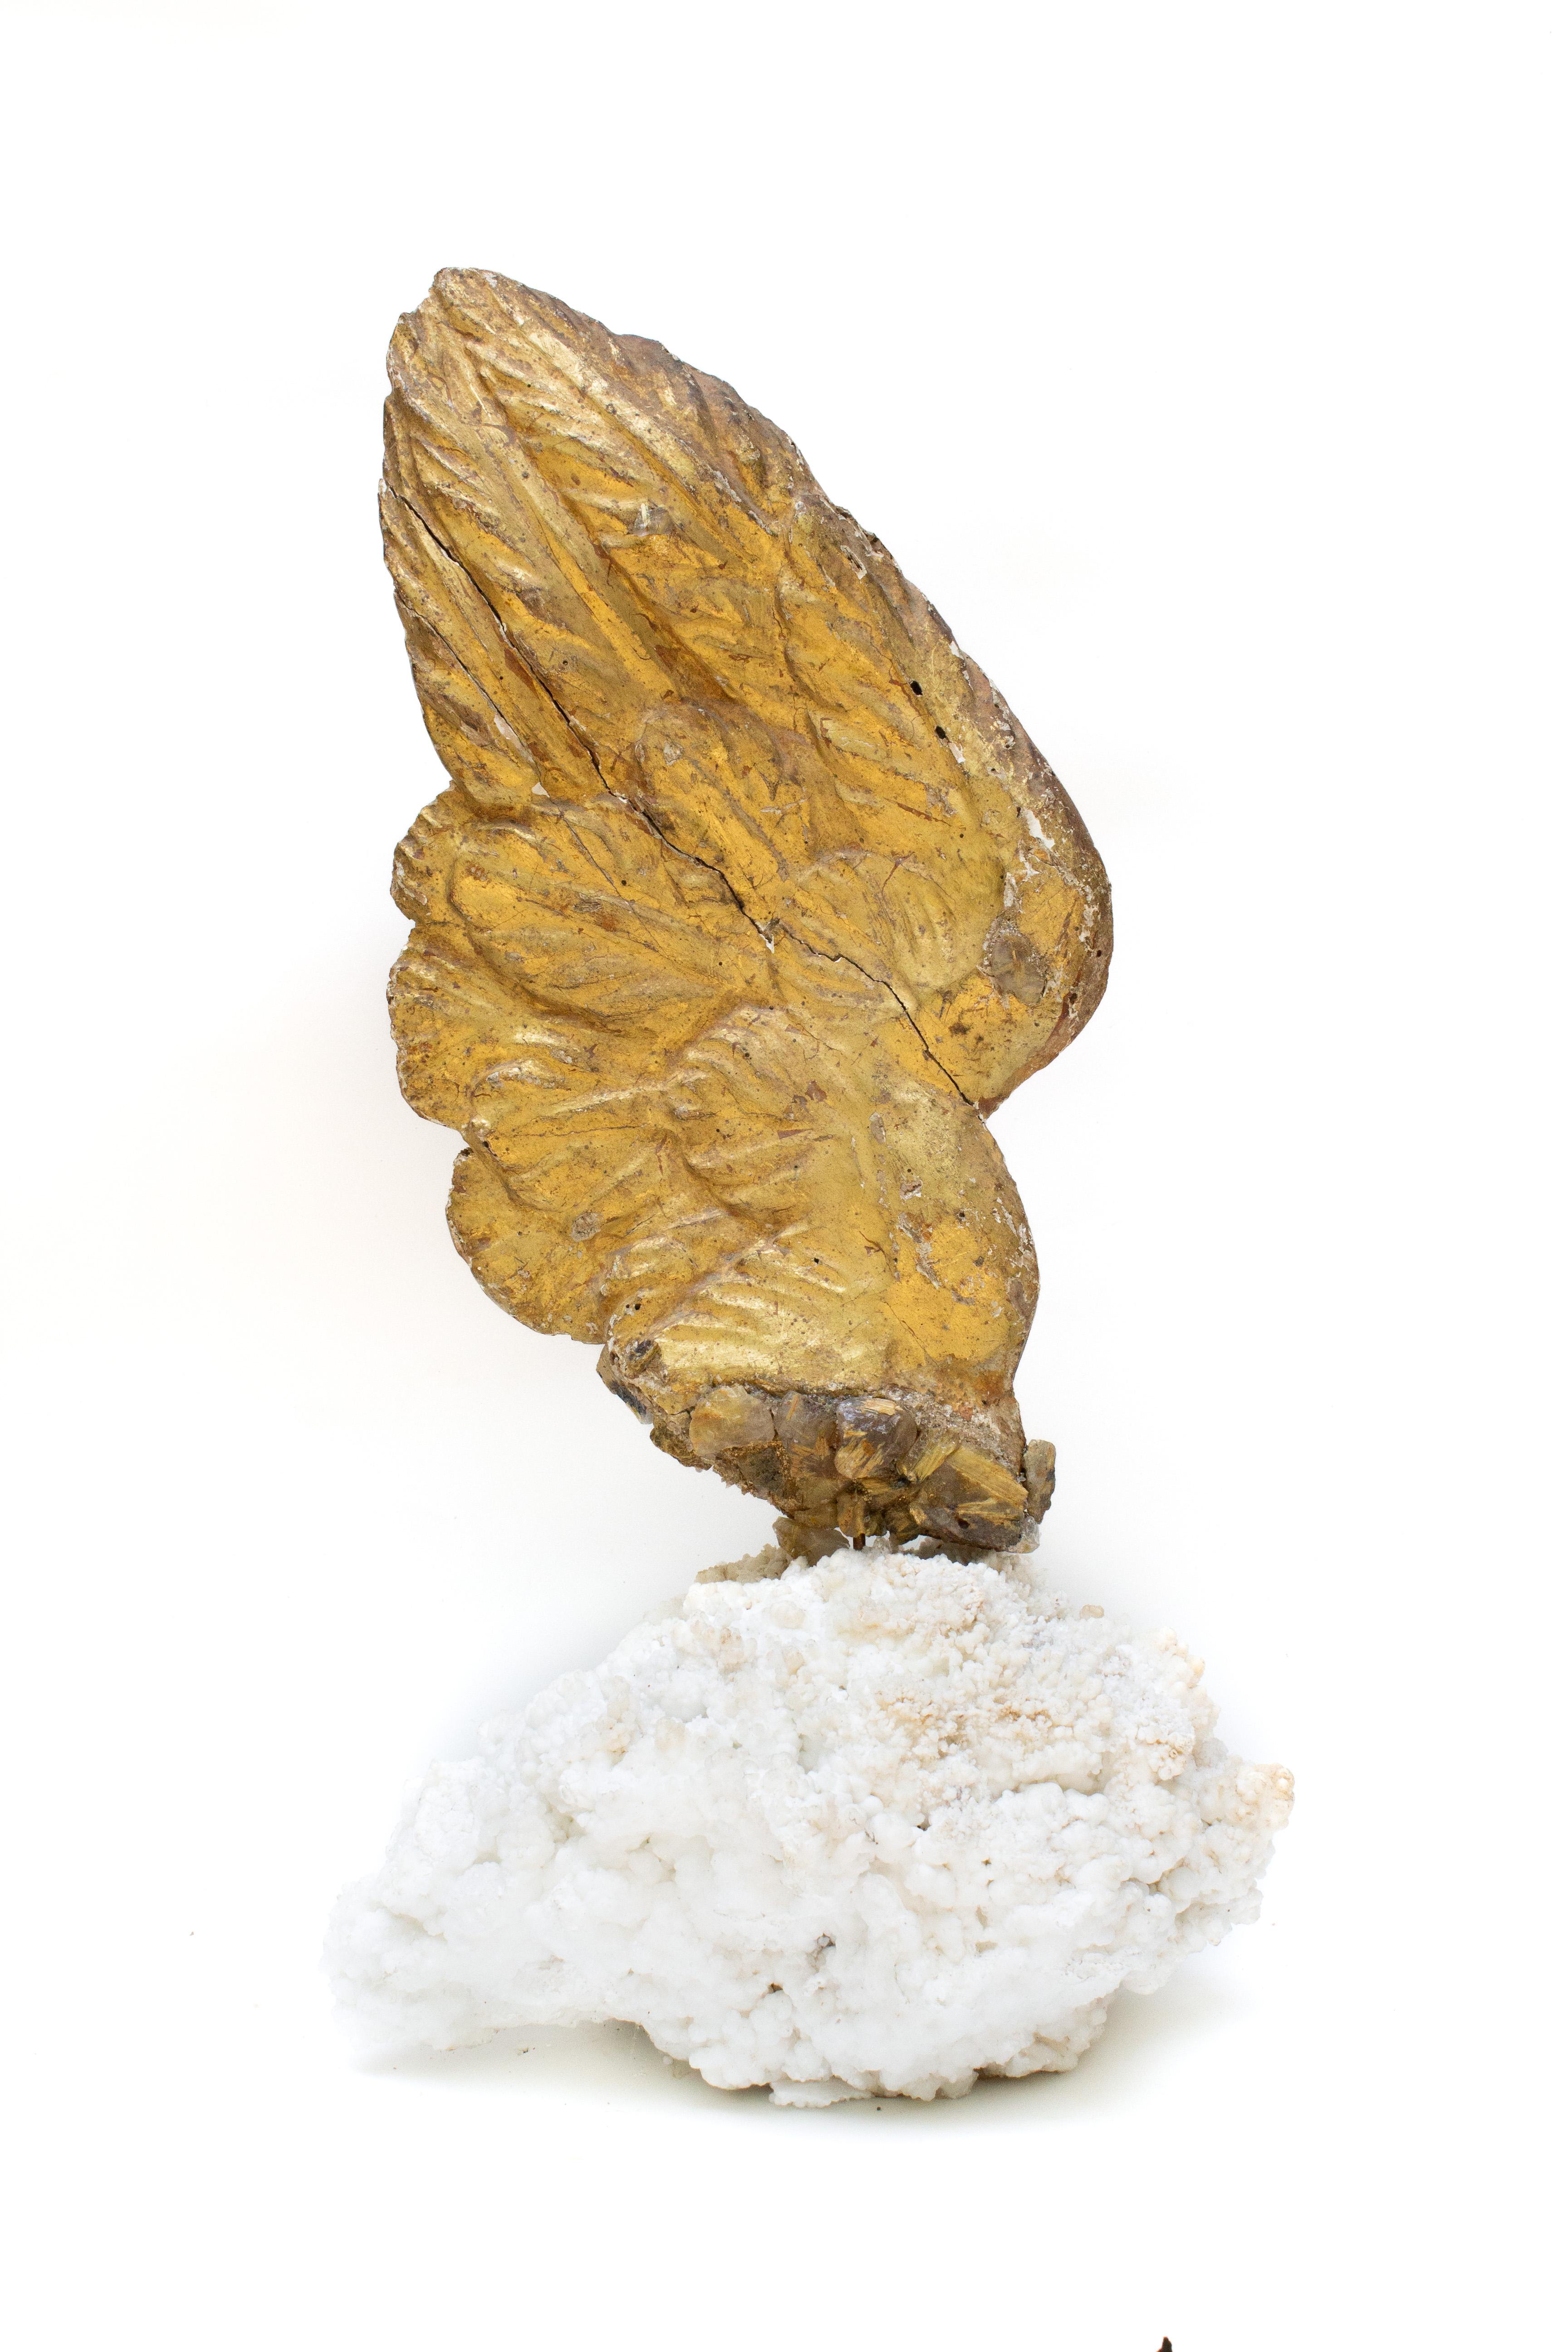 18th century Italian gold leaf angel wing with rutilated quartz crystals on natural-forming aragonite crystal cluster. The hand-carved angel wing was once part of a heavenly, angelic depiction in a historic church in Italy. 

The aragonite is from